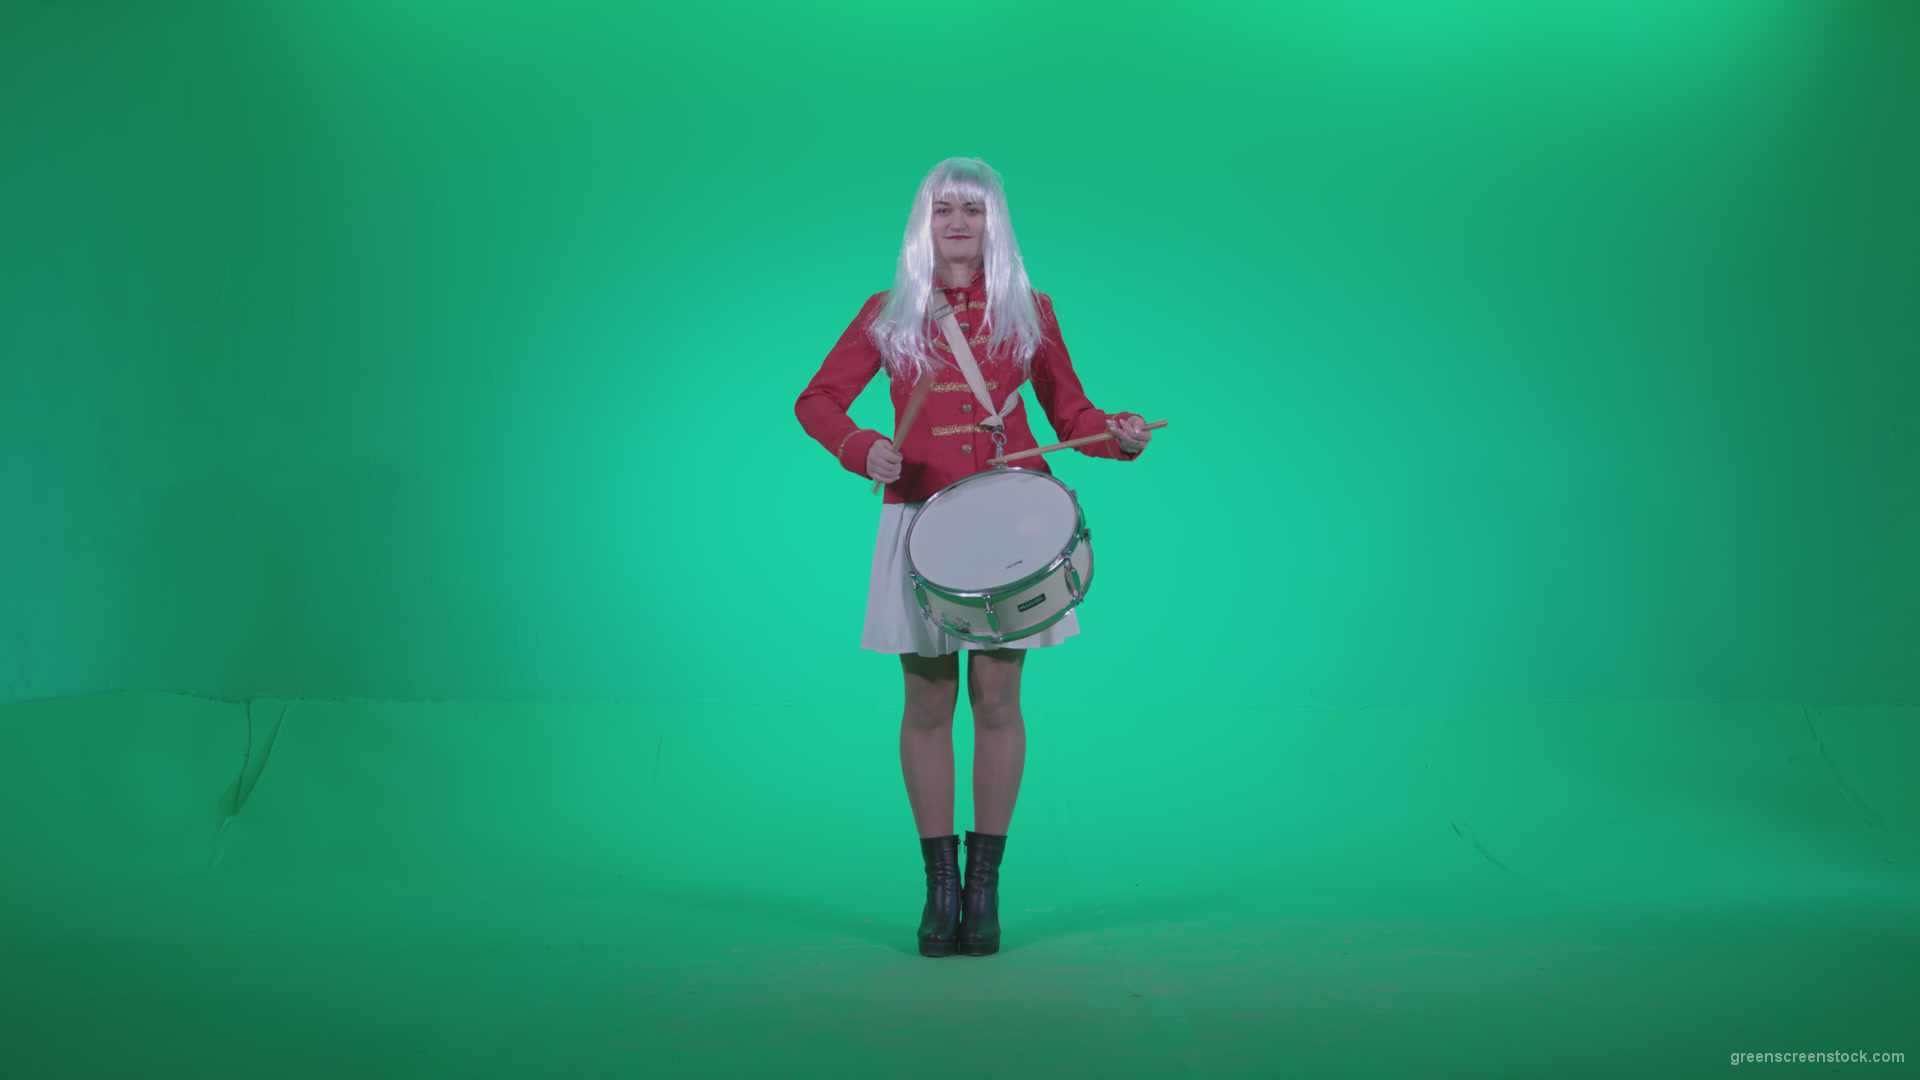 Snare-Drumming-girl-with-white-haire-z1_007 Green Screen Stock